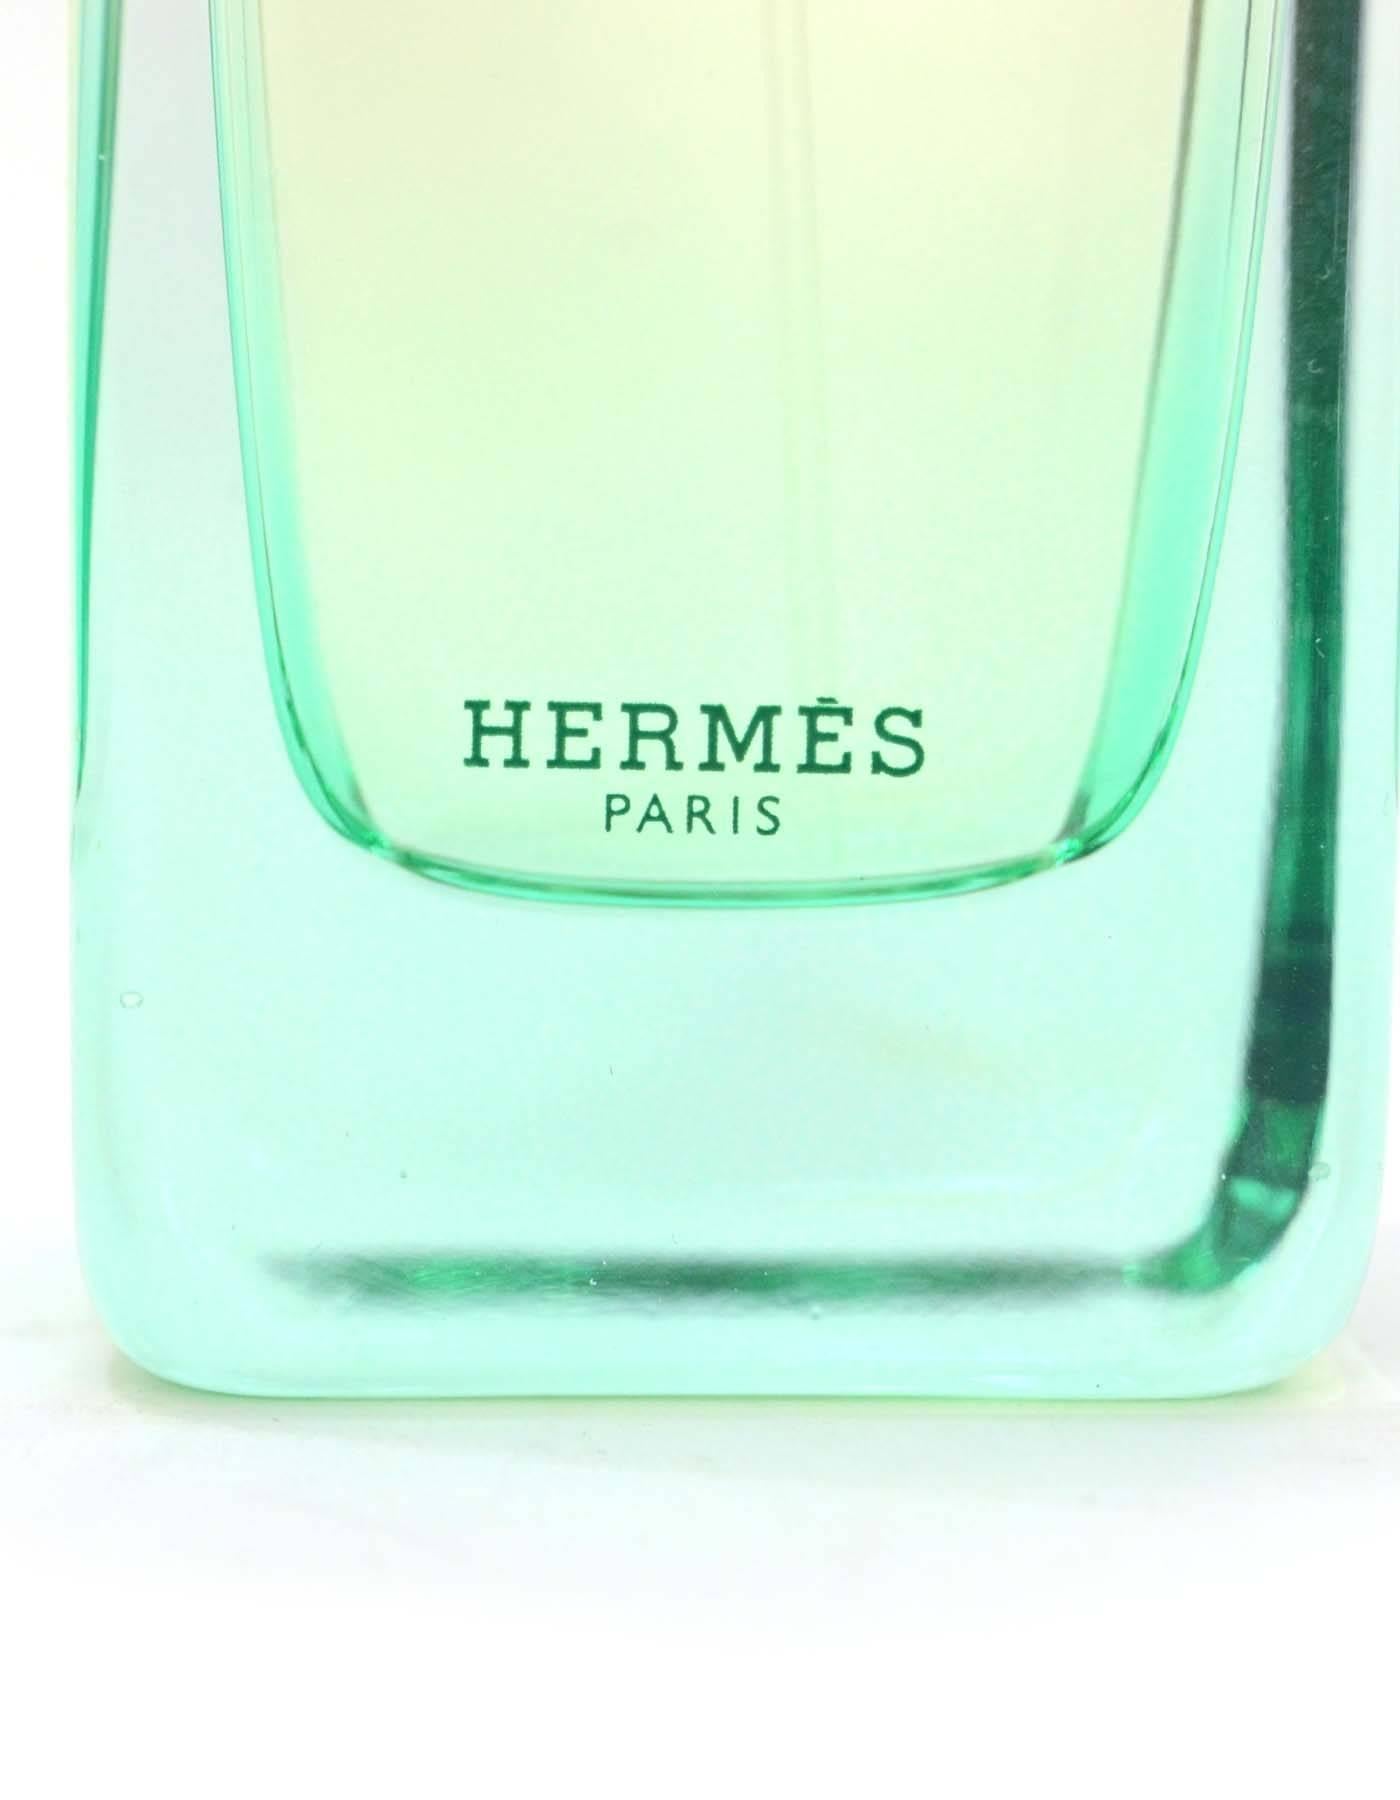 Hermes 'Un Jardin Sur Le Nil' Eu De Toilette Perfume 
Hermes was inspired by the Nile River- a symbol of renewal and fertility- when creating this fragrance
Made In: France
Color: Clear
Materials: Perfume, Glass and resin
Closure/Opening: